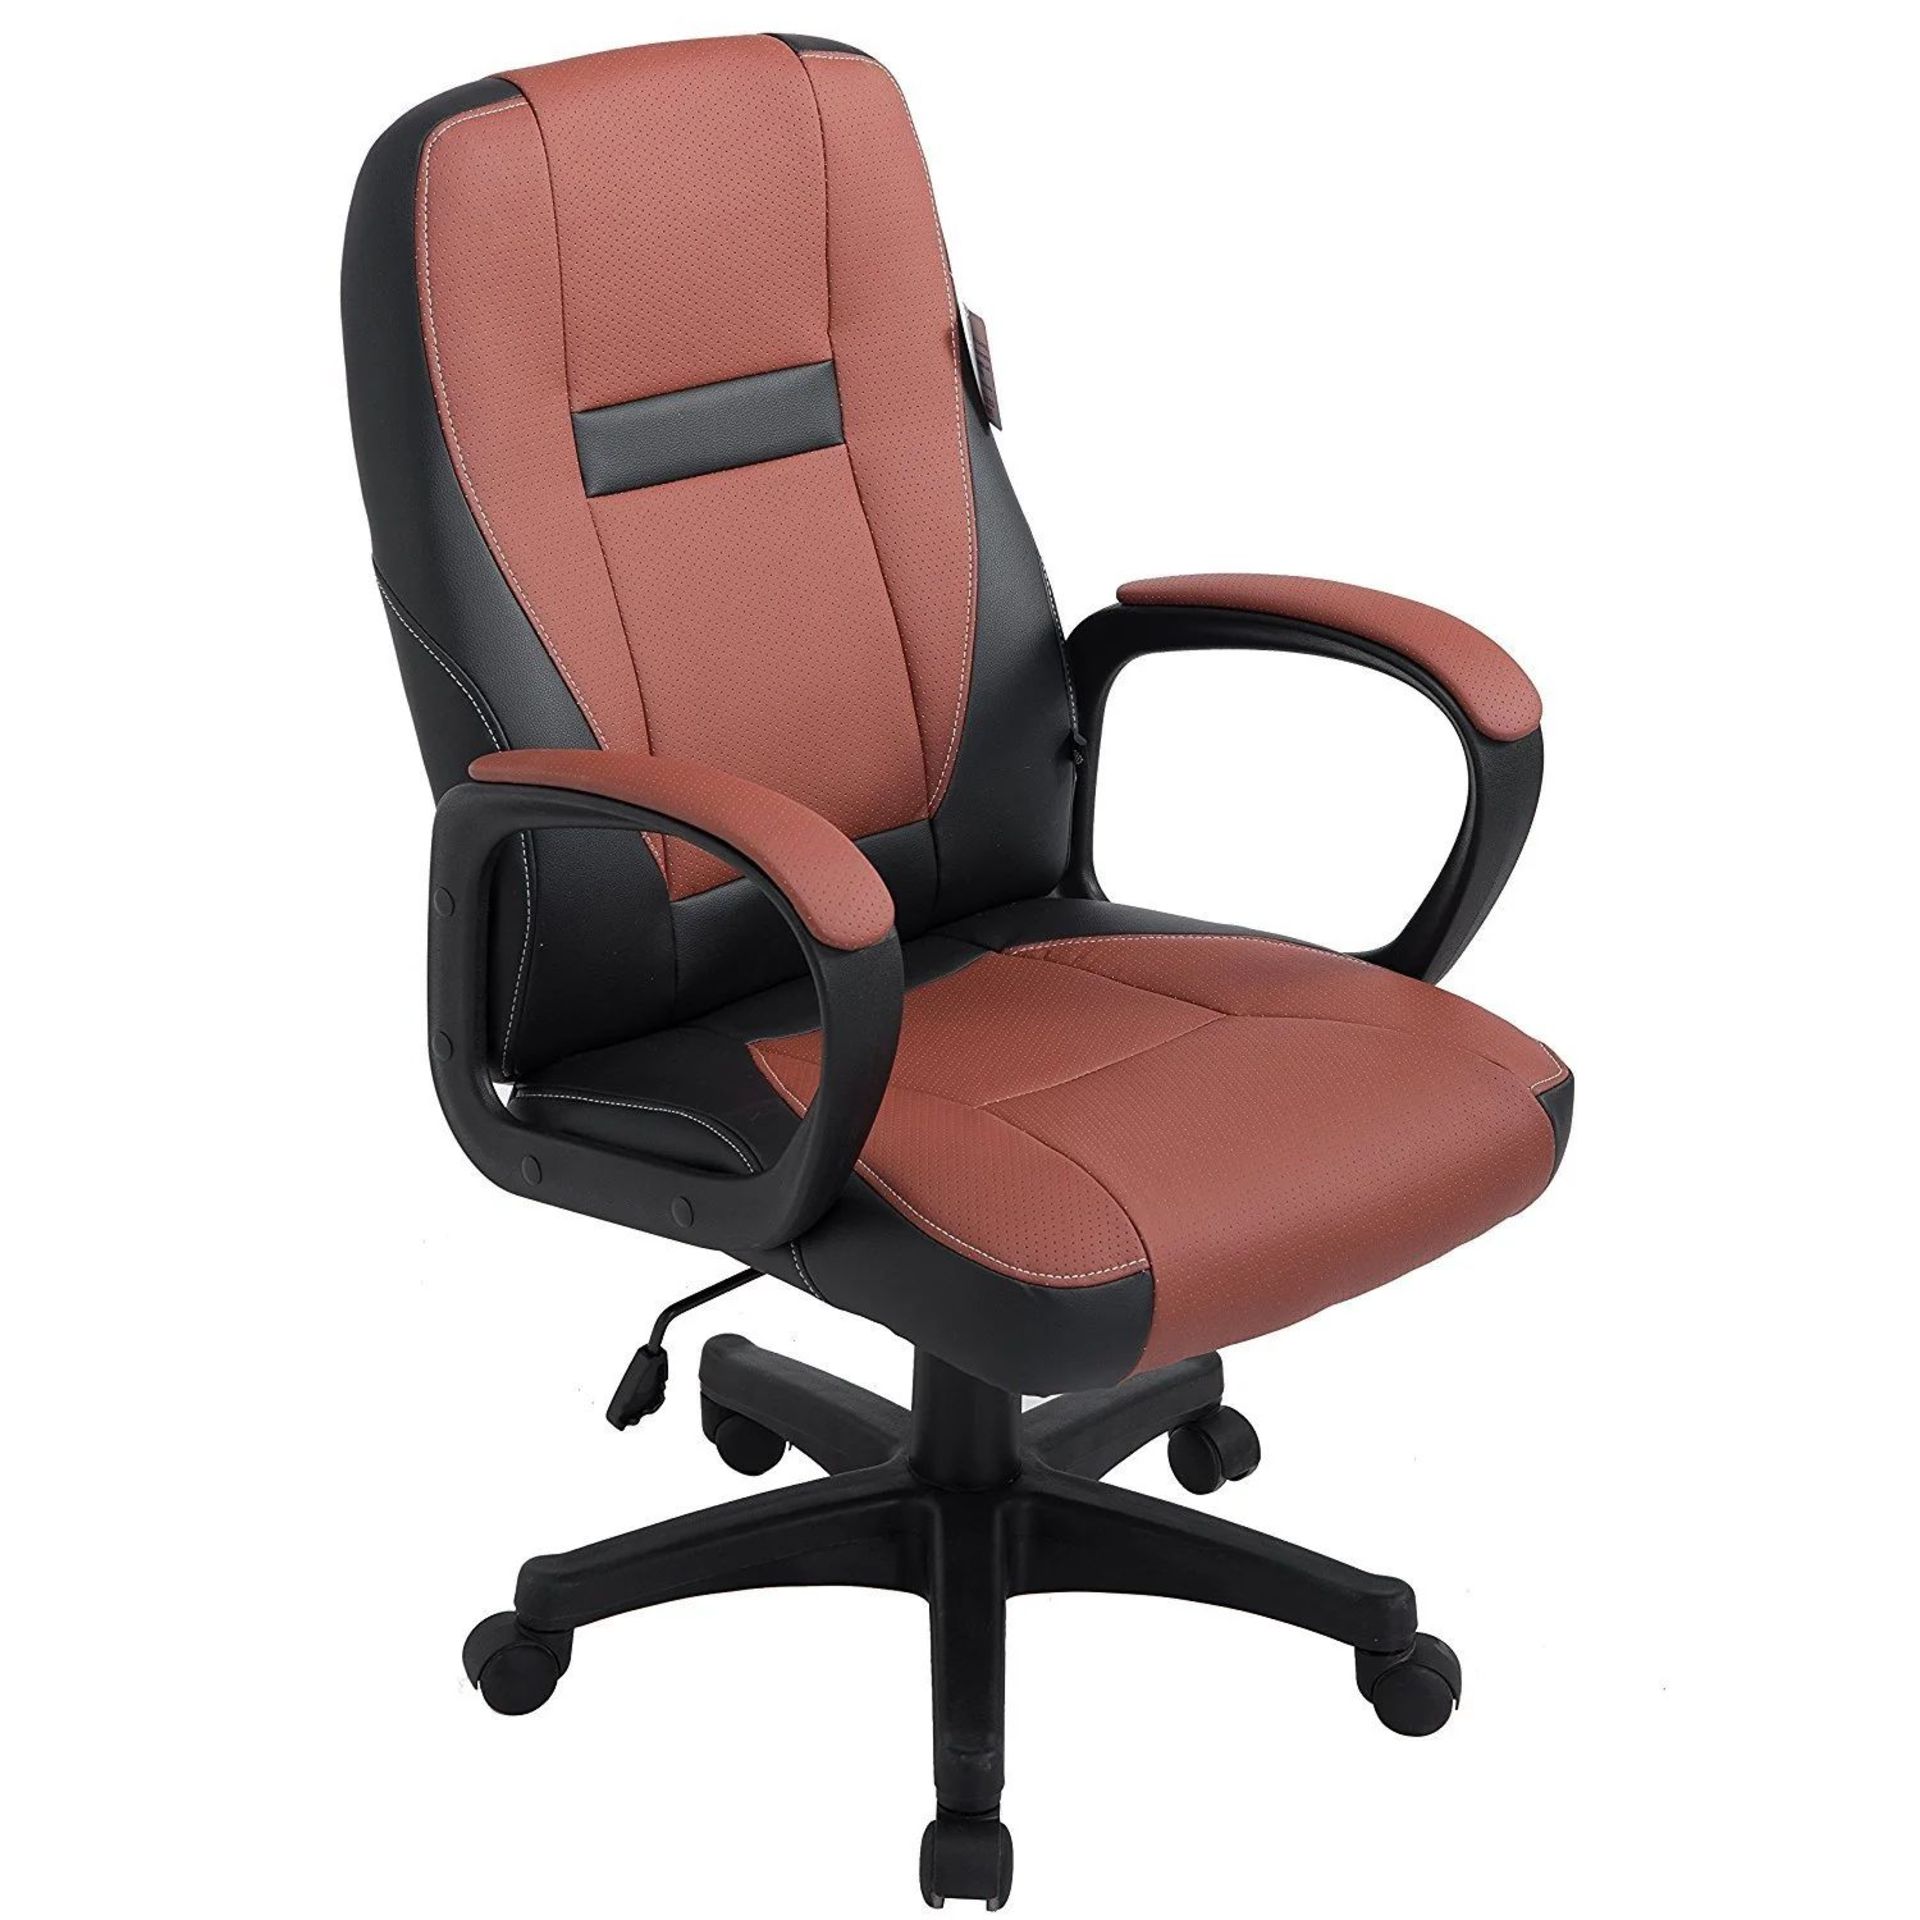 Swivel Office Desk Chair MO19 Brown PU Leather. - ER30.